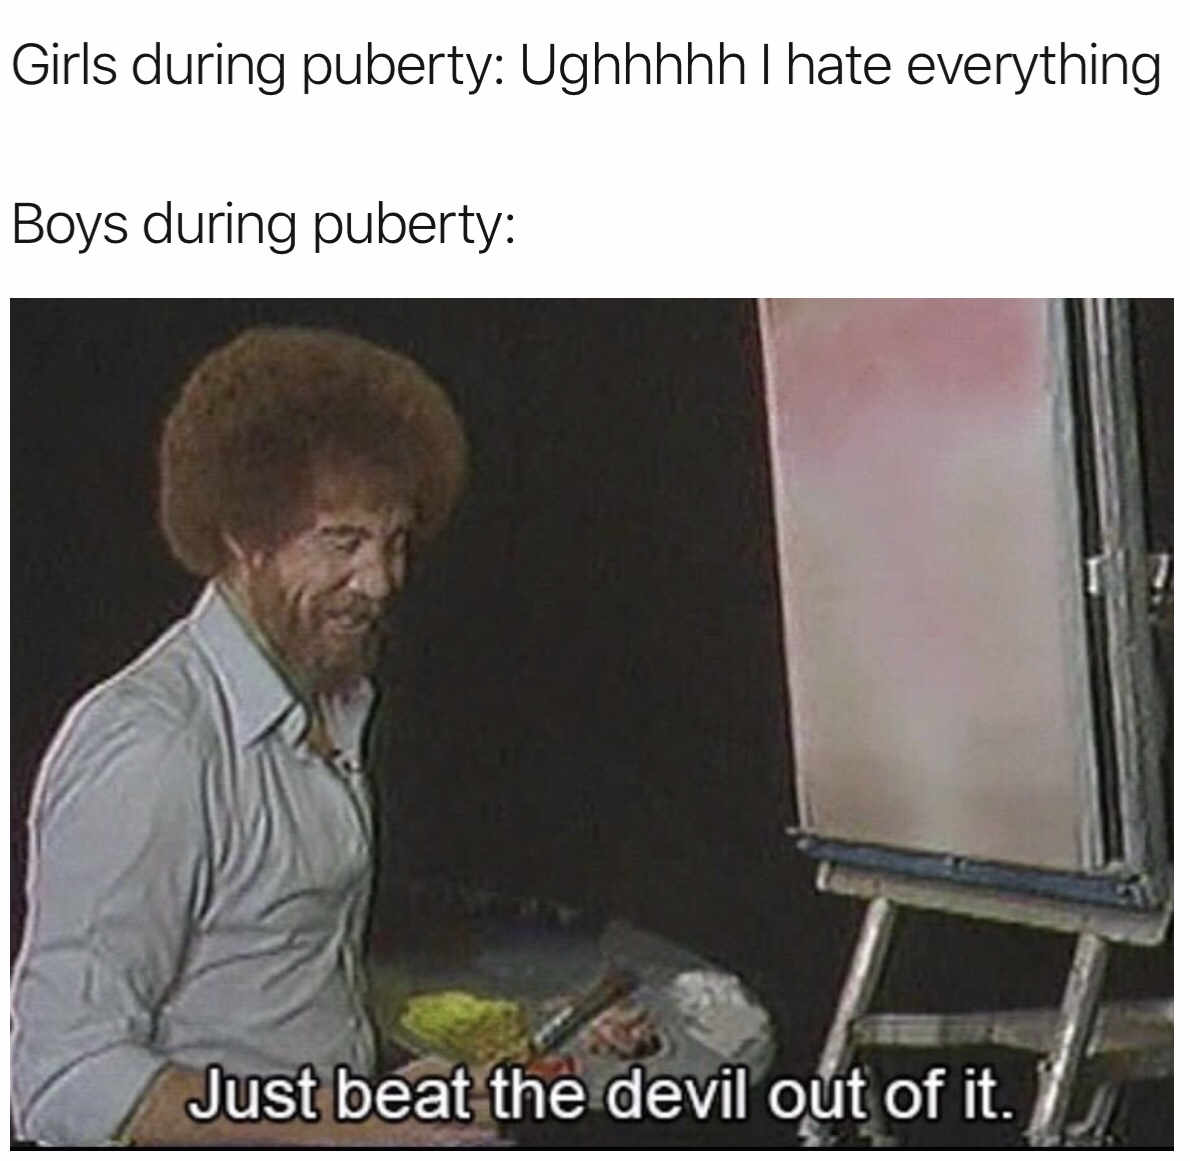 girls vs boys puberty memes - Girls during puberty Ughhhhh I hate everything Boys during puberty Just beat the devil out of it.